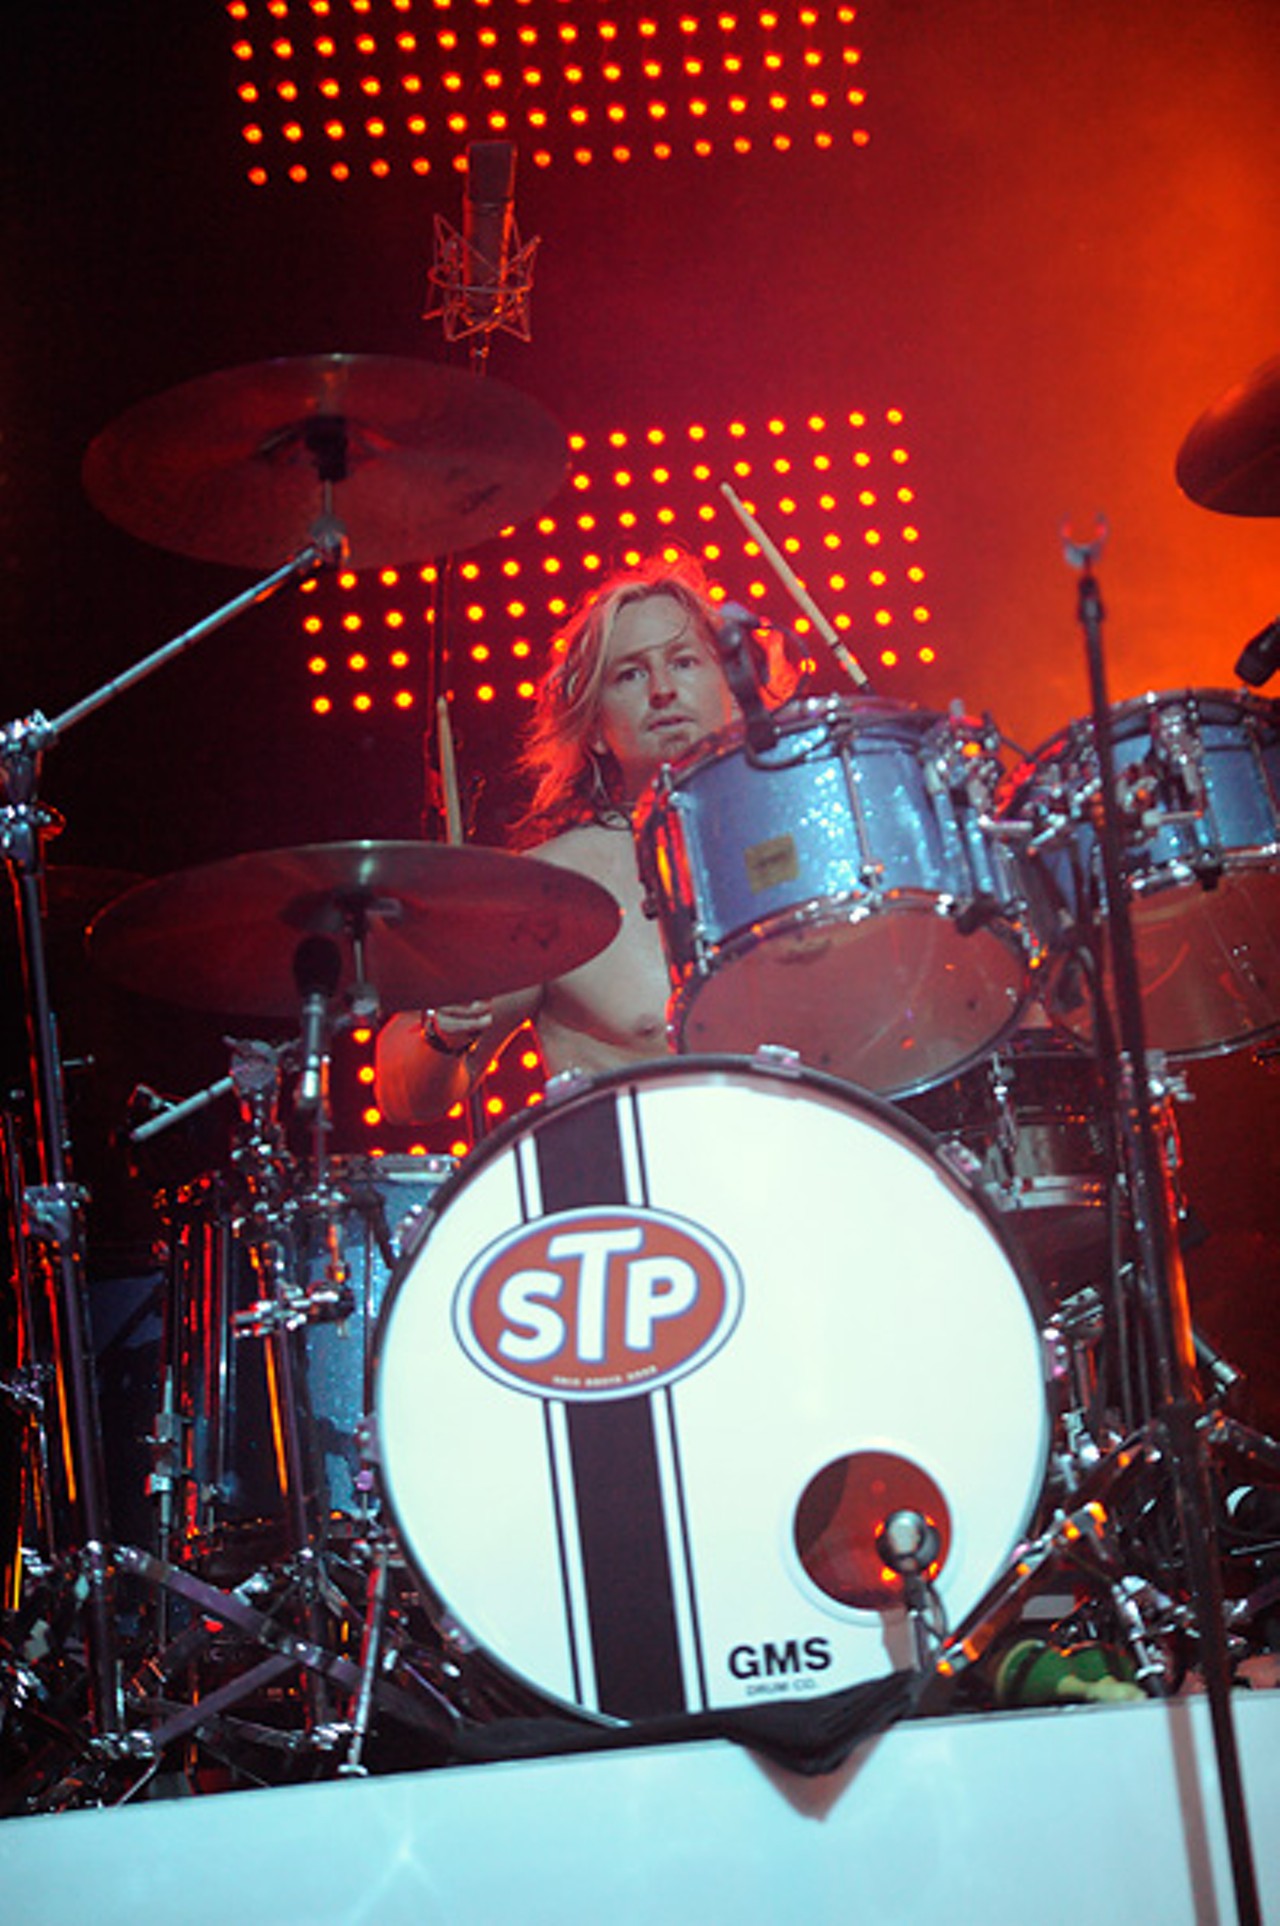 Drummer Eric Kret, rocking his kit. Kret, along with all three other original members of Stone Temple Pilots, are performing on this tour.